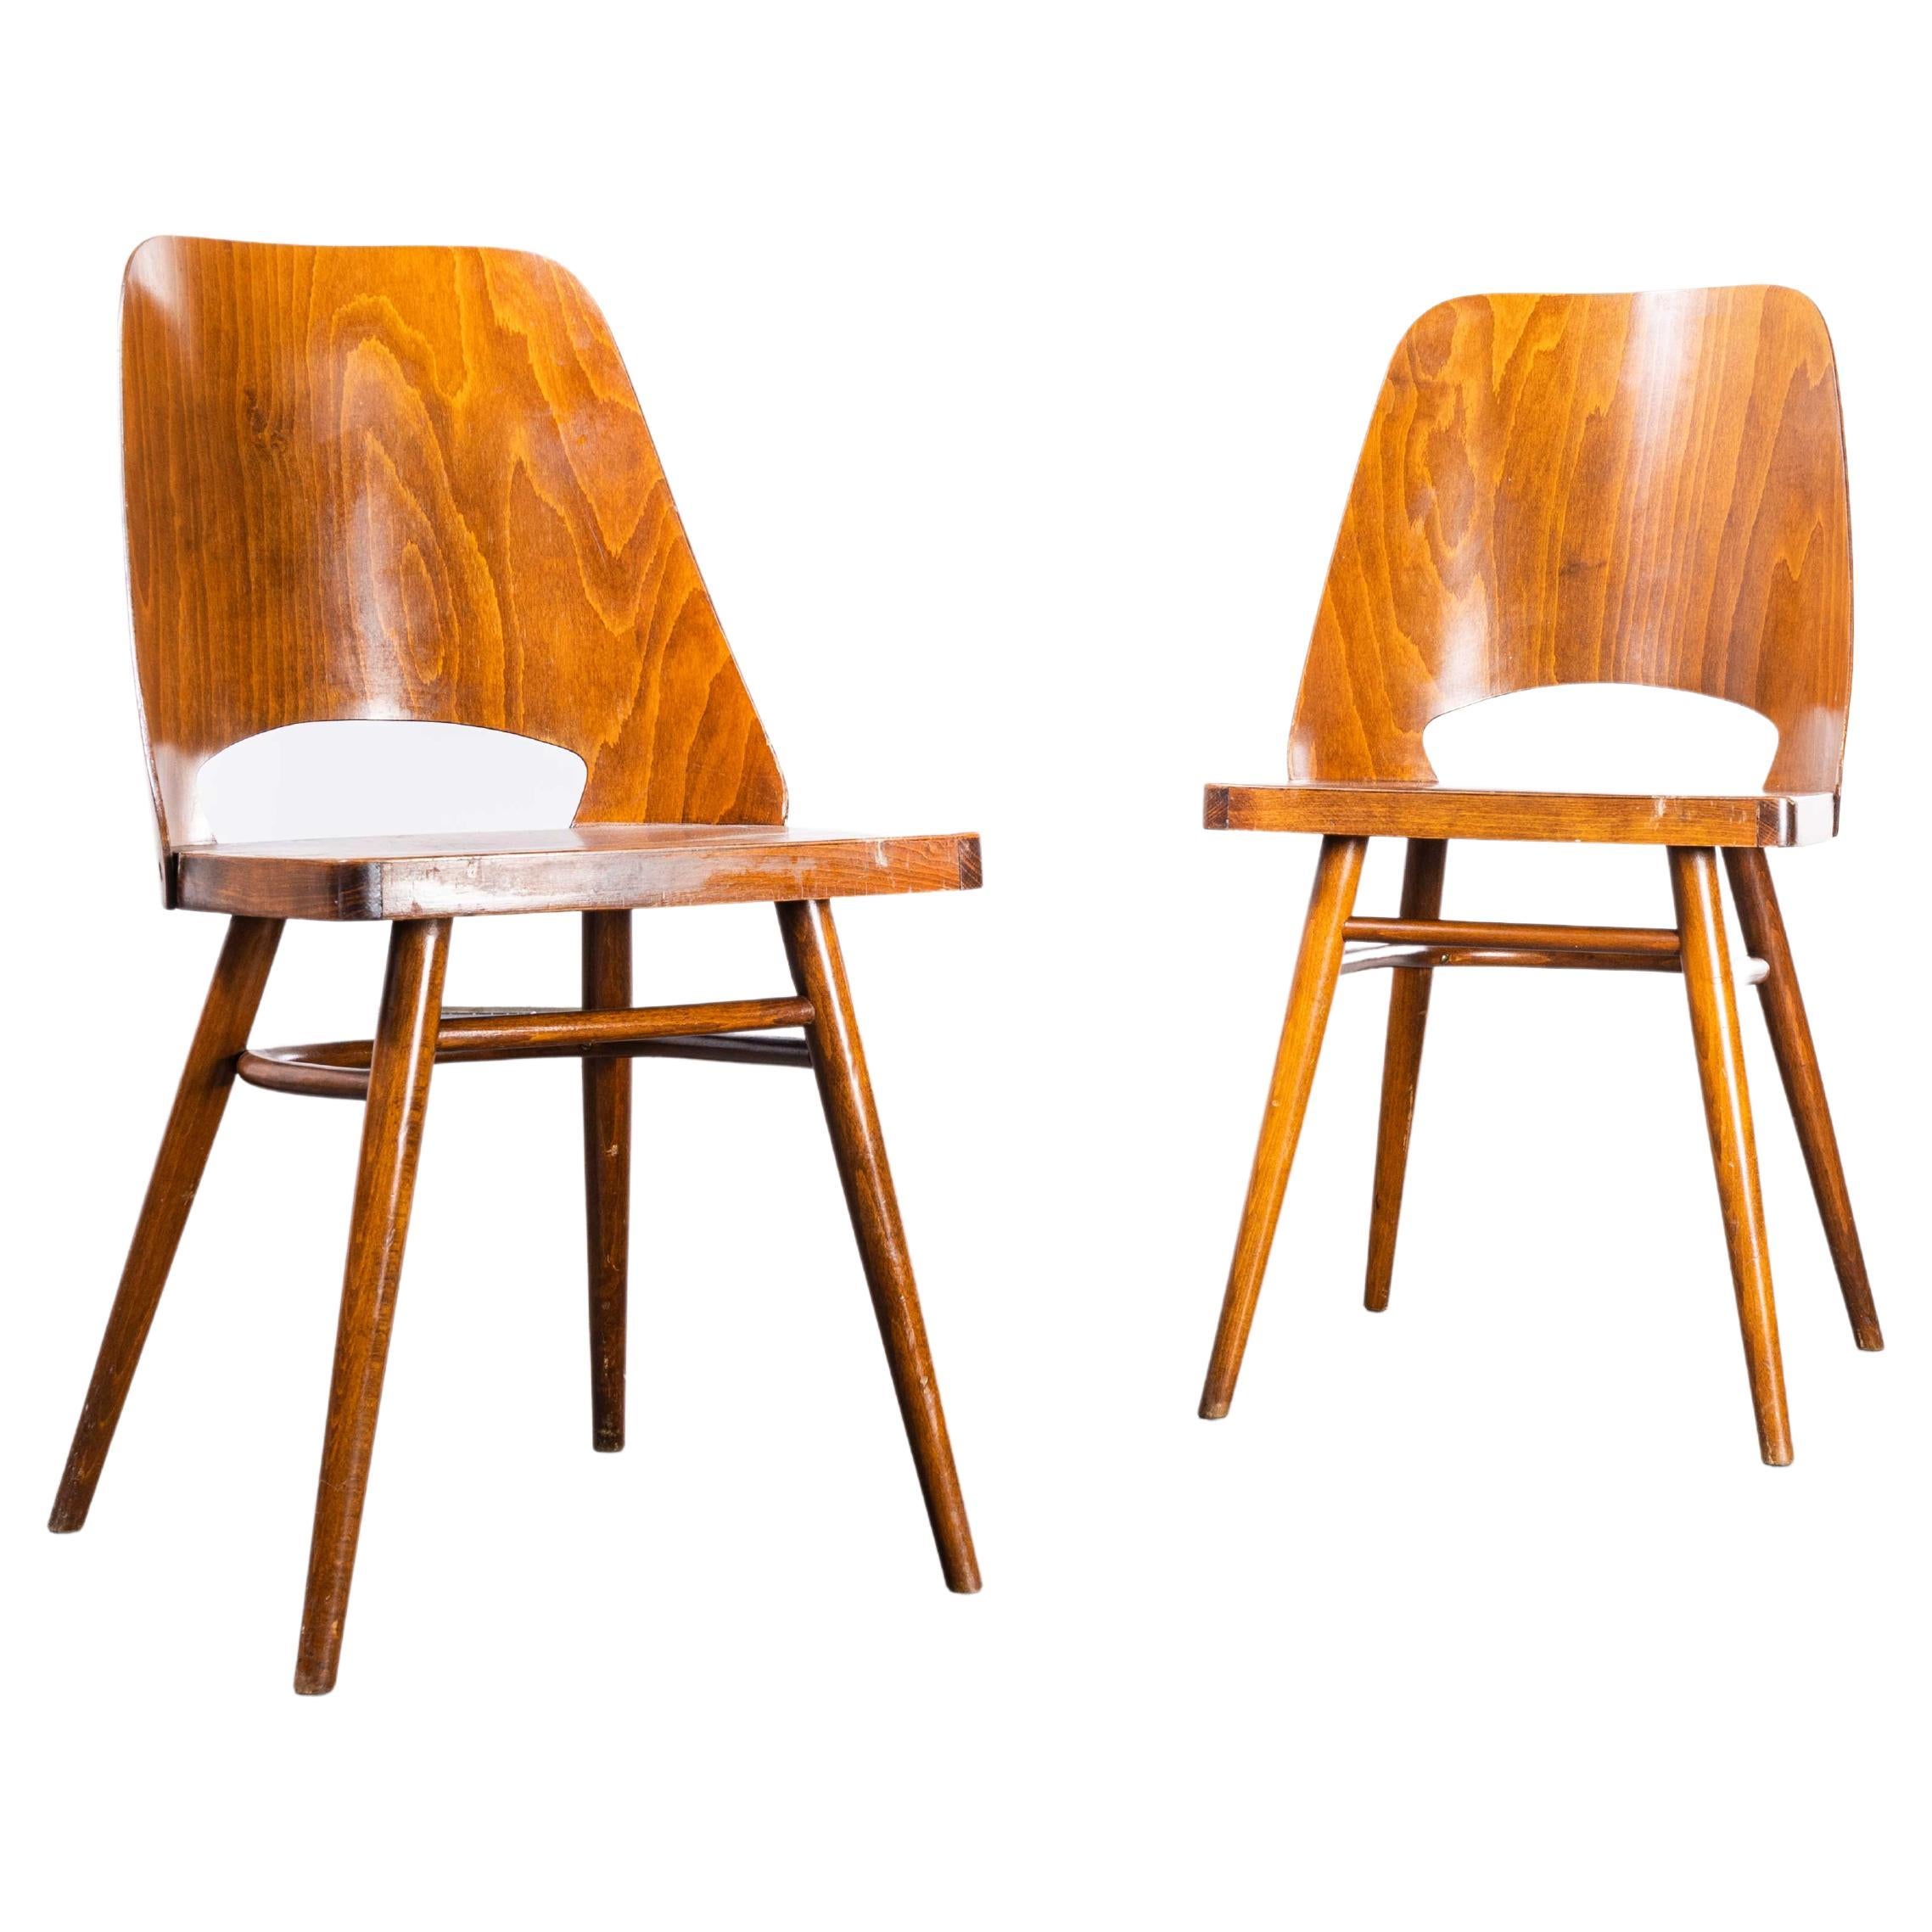 1950's Honey Beech Dining Chairs By Radomir Hoffman - Pair For Sale